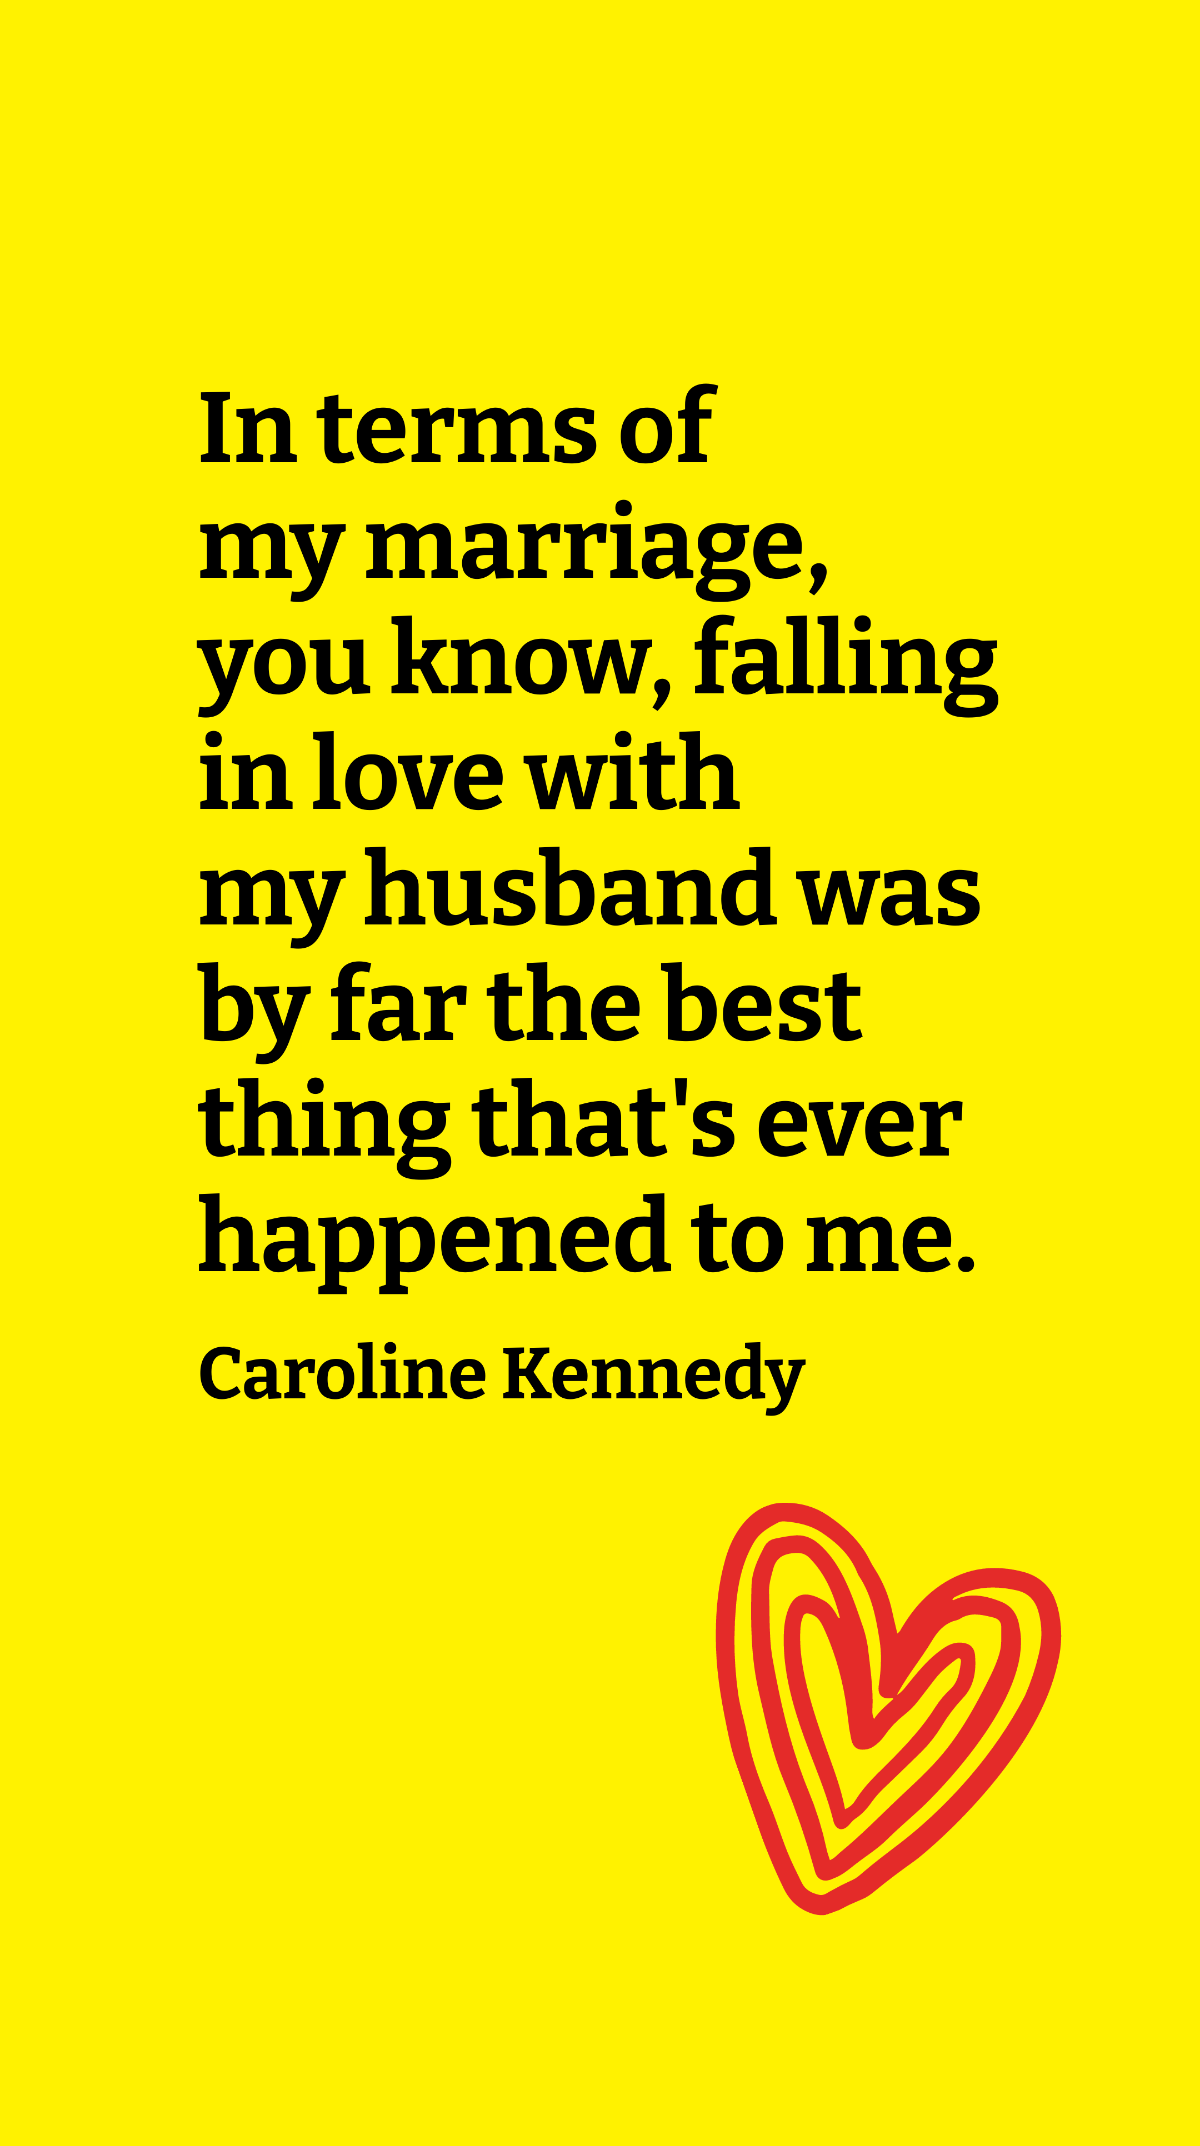 Caroline Kennedy - In terms of my marriage, you know, falling in love with my husband was by far the best thing that's ever happened to me. Template